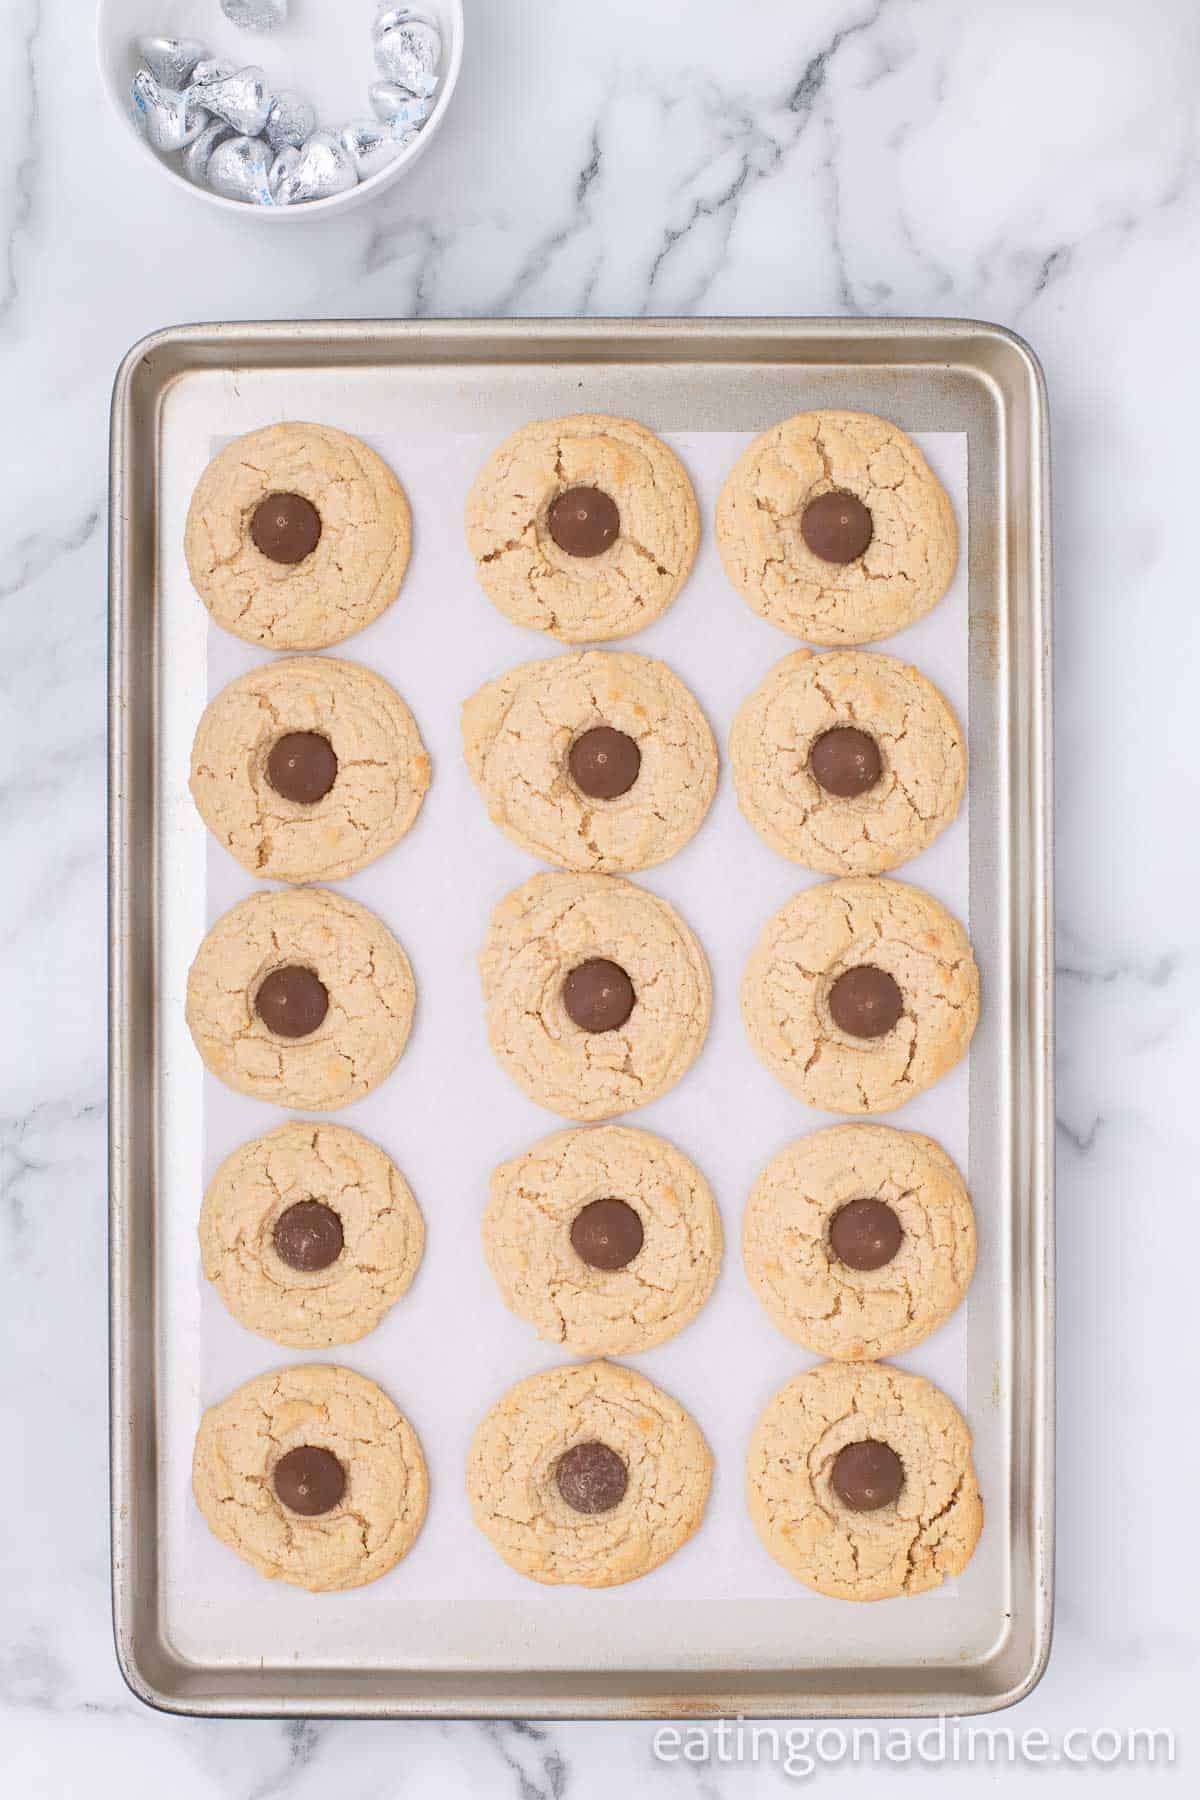 Top cookies with Hershey Kiss on a baking sheet